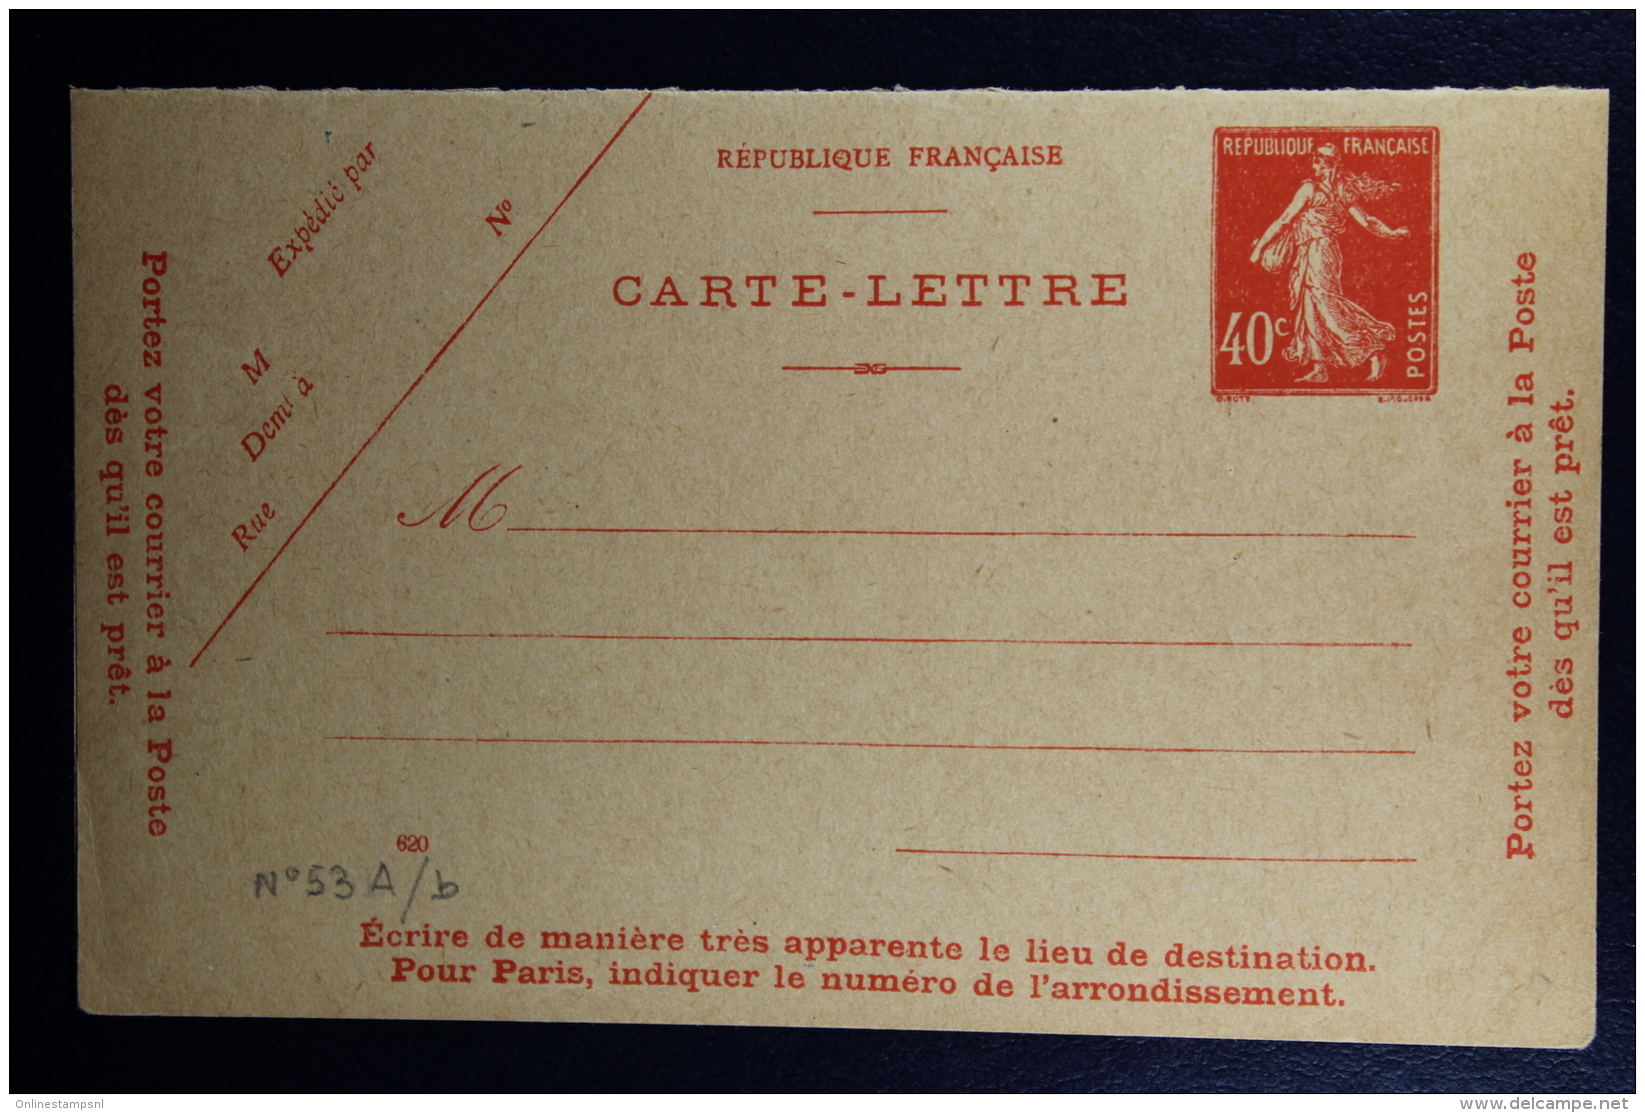 France: Carte-Lettre  Semeuse Camee  40 C.   Type P2 A   Non Perforée Not Used   Date 620 - Letter Cards